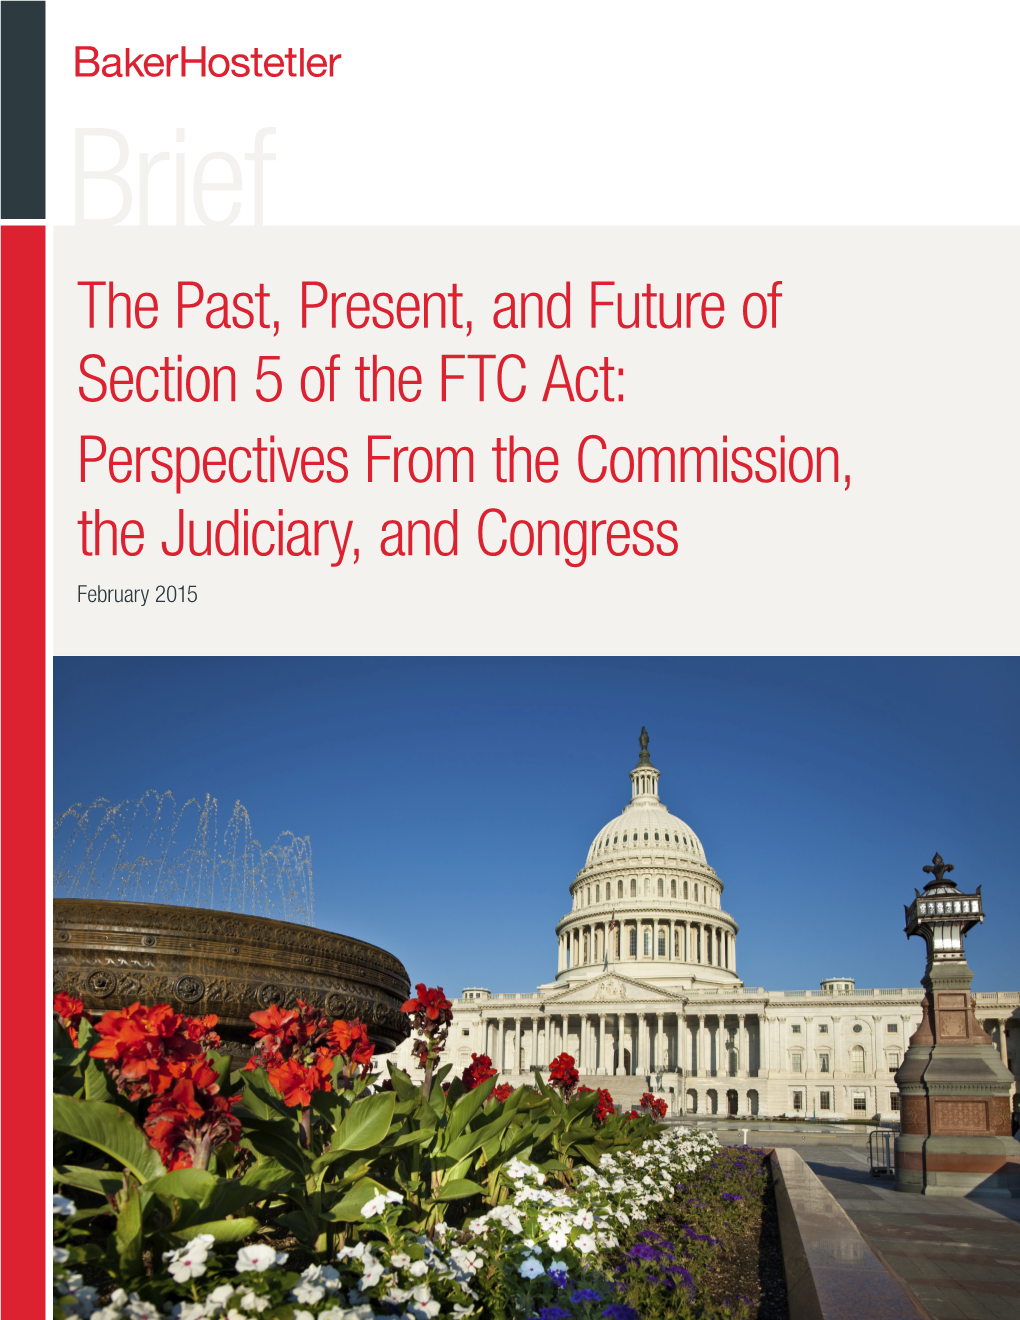 The Past, Present, and Future of Section 5 of the FTC Act: Perspectives from the Commission, the Judiciary, and Congress